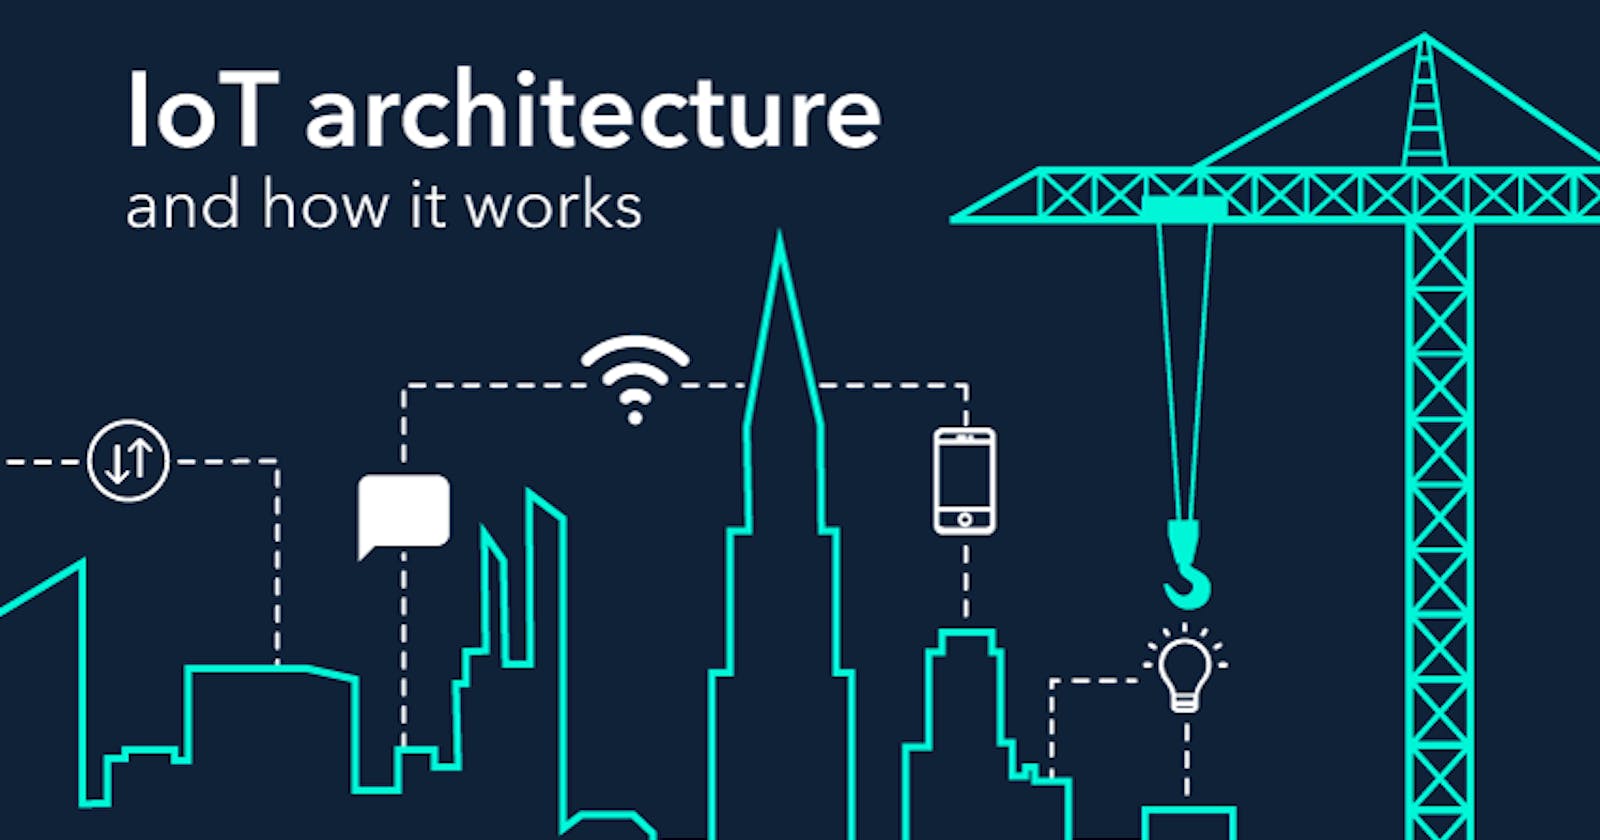 END TO END ARCHITECTURE OF IoT :